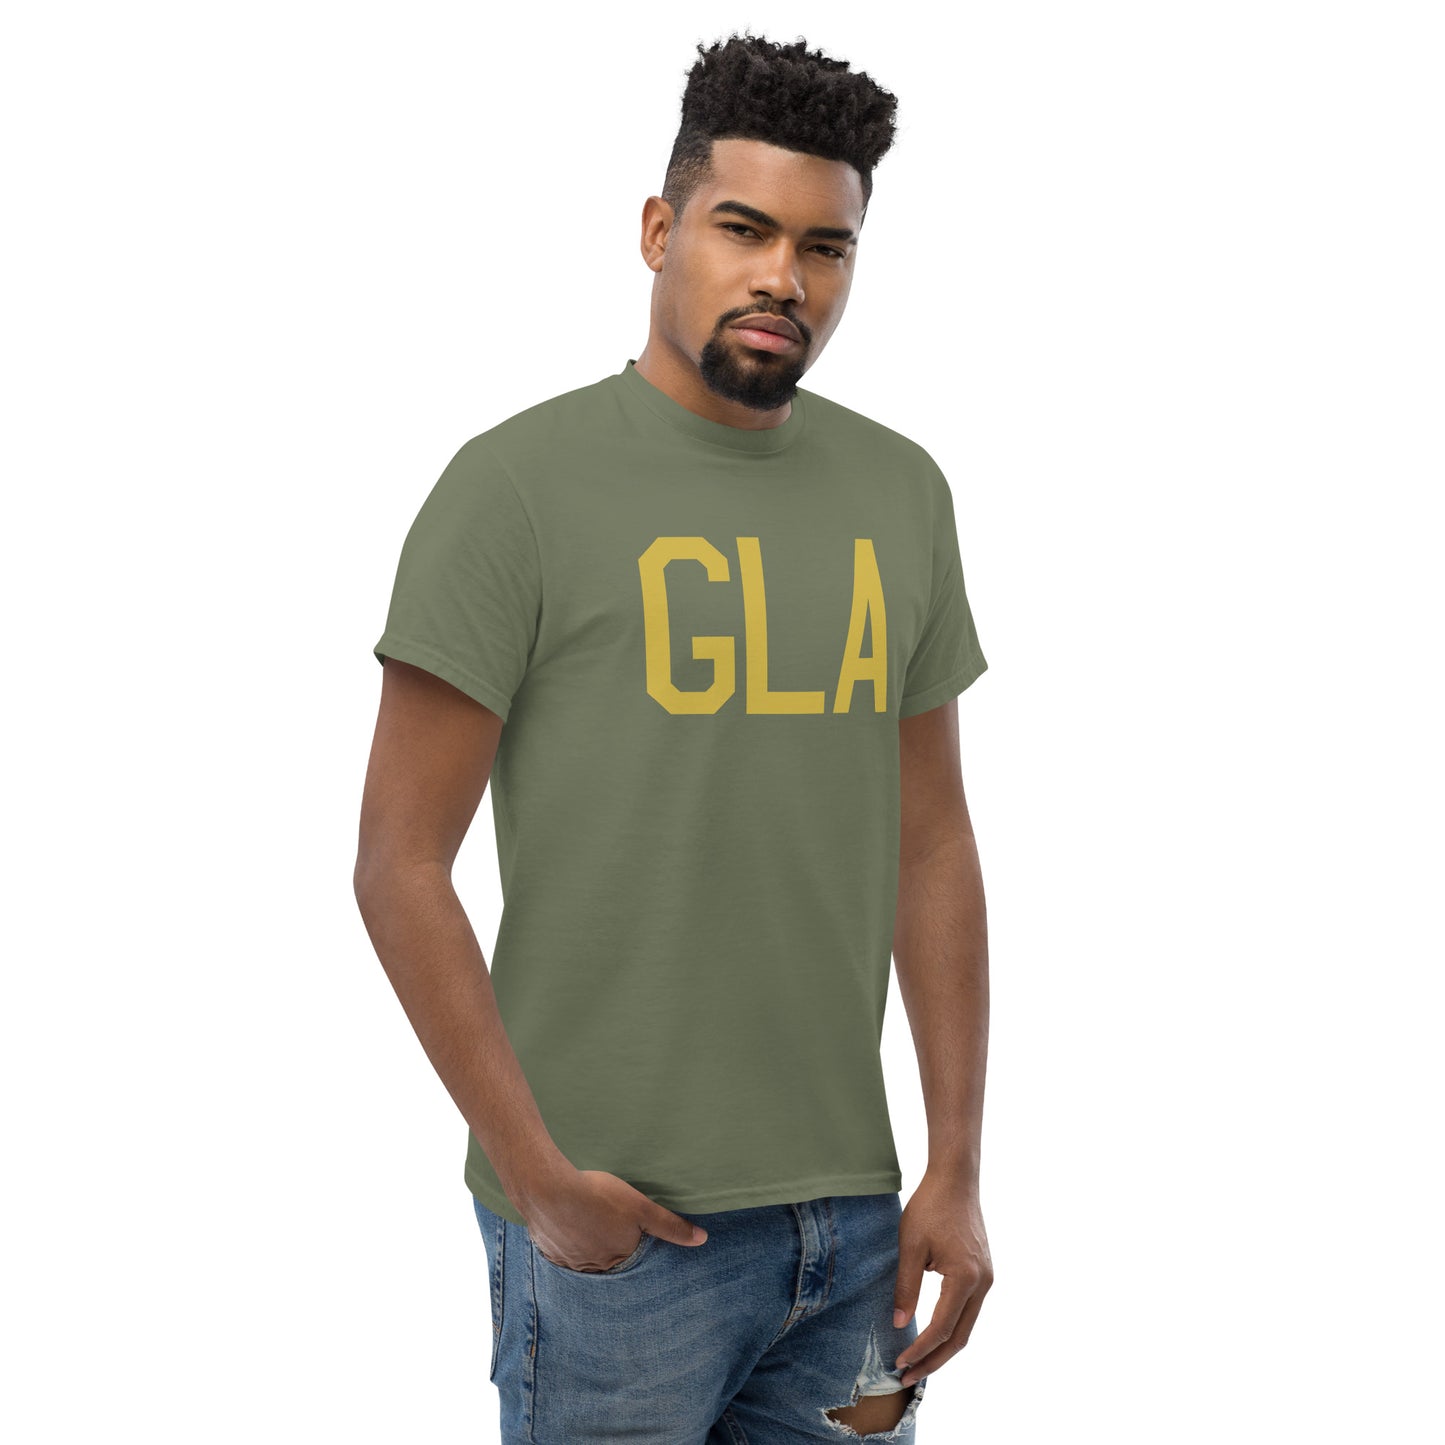 Aviation Enthusiast Men's Tee - Old Gold Graphic • GLA Glasgow • YHM Designs - Image 08